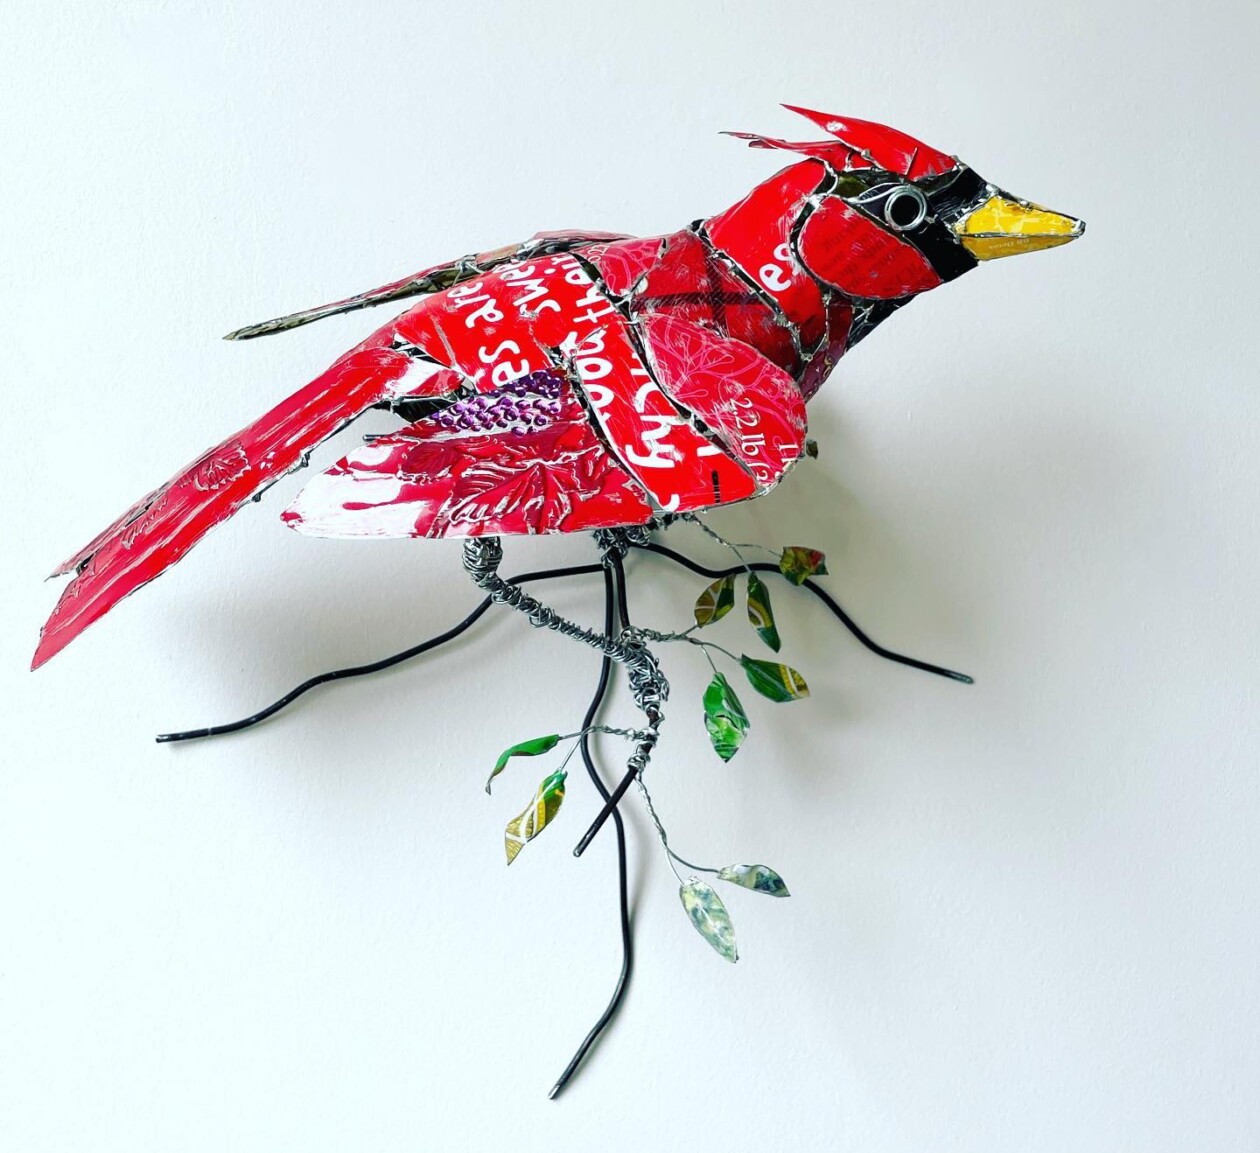 Bird Sculptures Made From Recycled Metal Scraps By Barbara Franc (9)